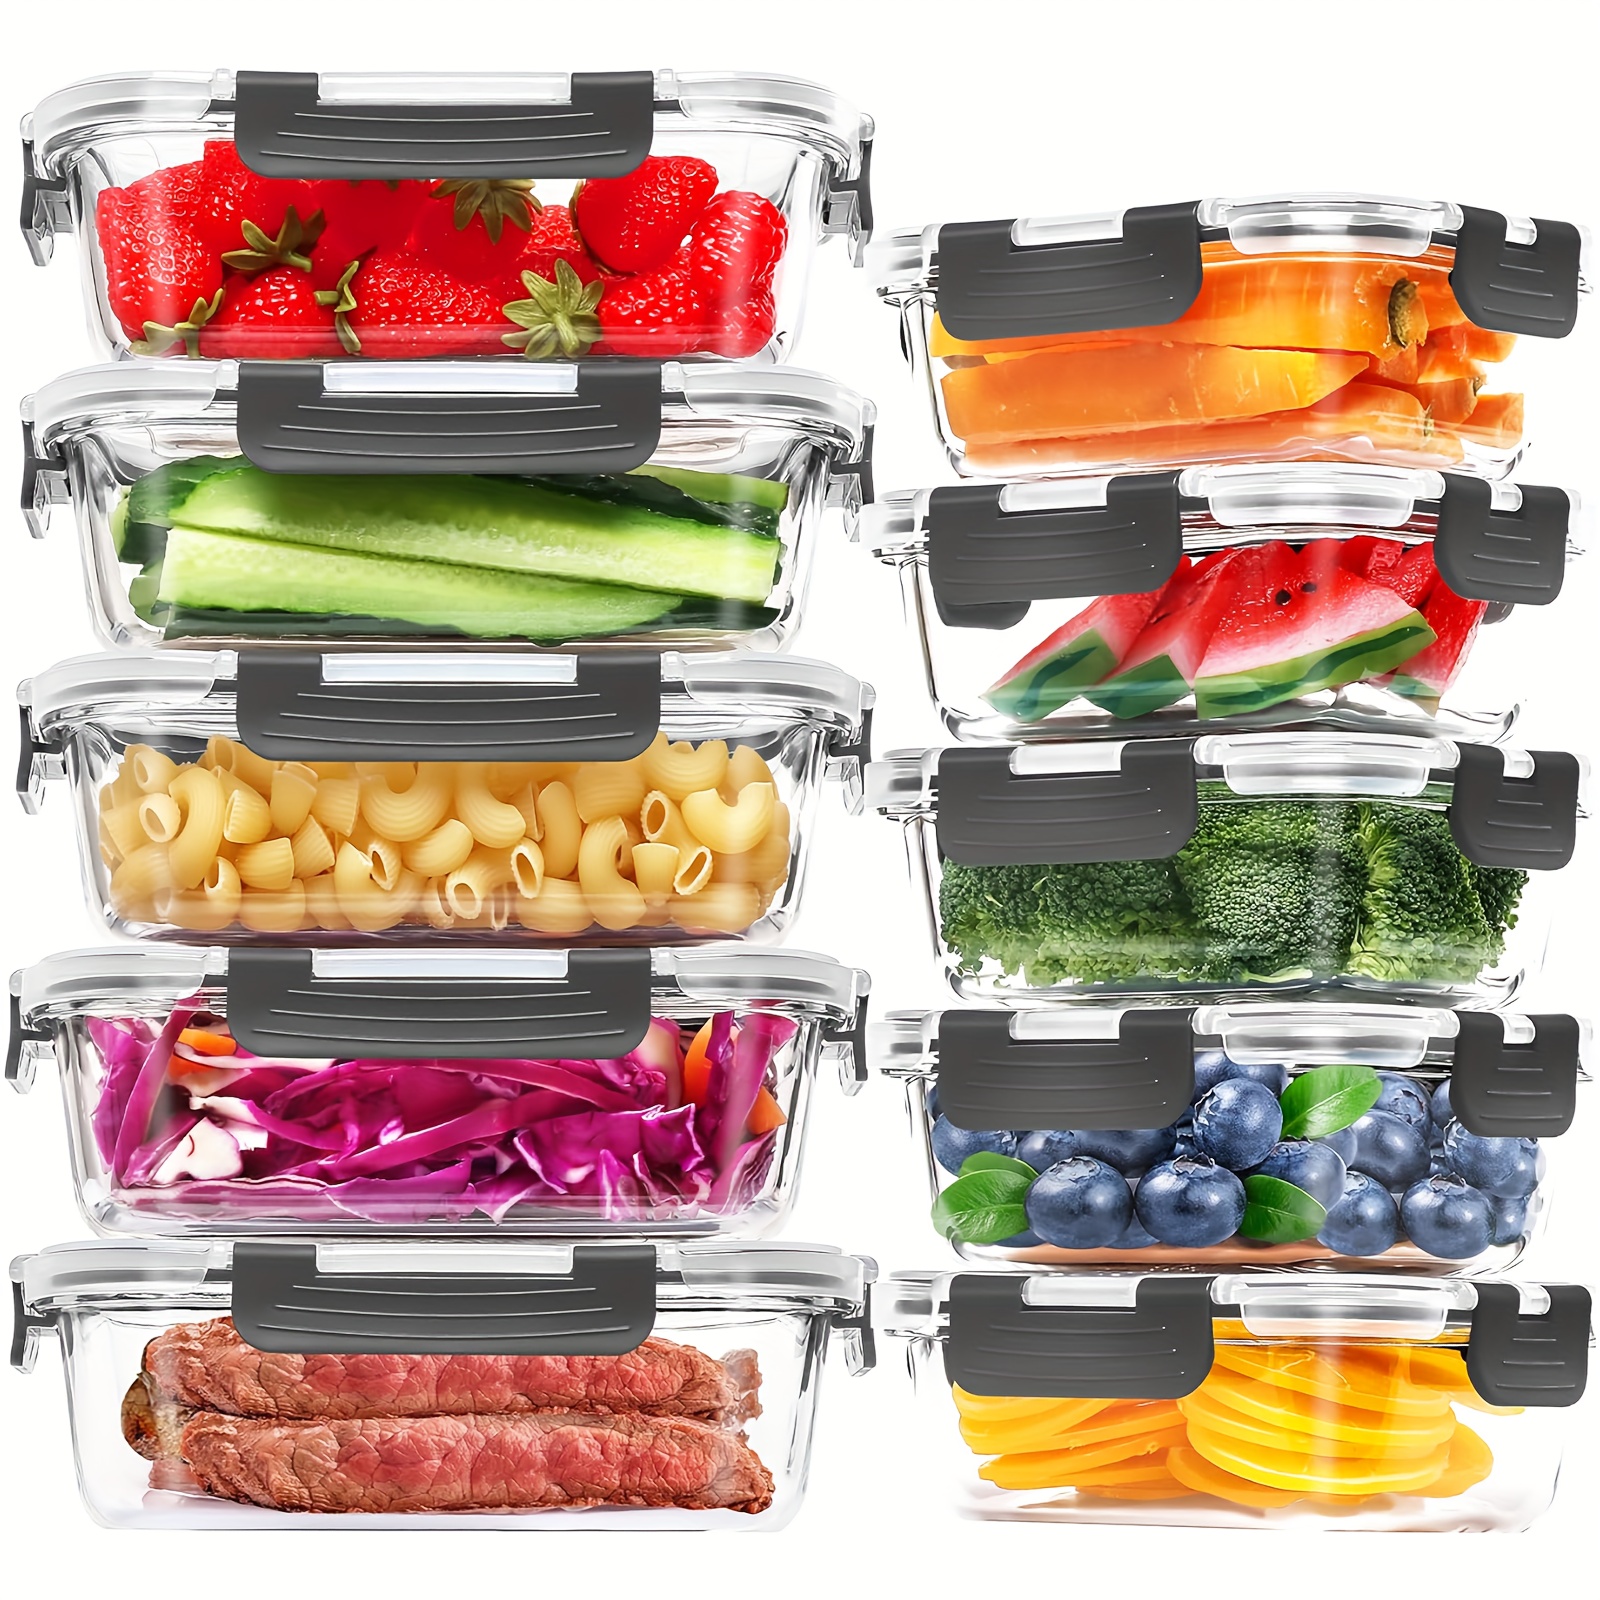 

Skroam 10 Pack Glass Food Storage Containers With Lids, Glass Airtight Meal Prep Container Set For Lunch, On The Go, Leftover, Kitchen Pantry Organizers And Storage, Bpa Free & Leak Proof